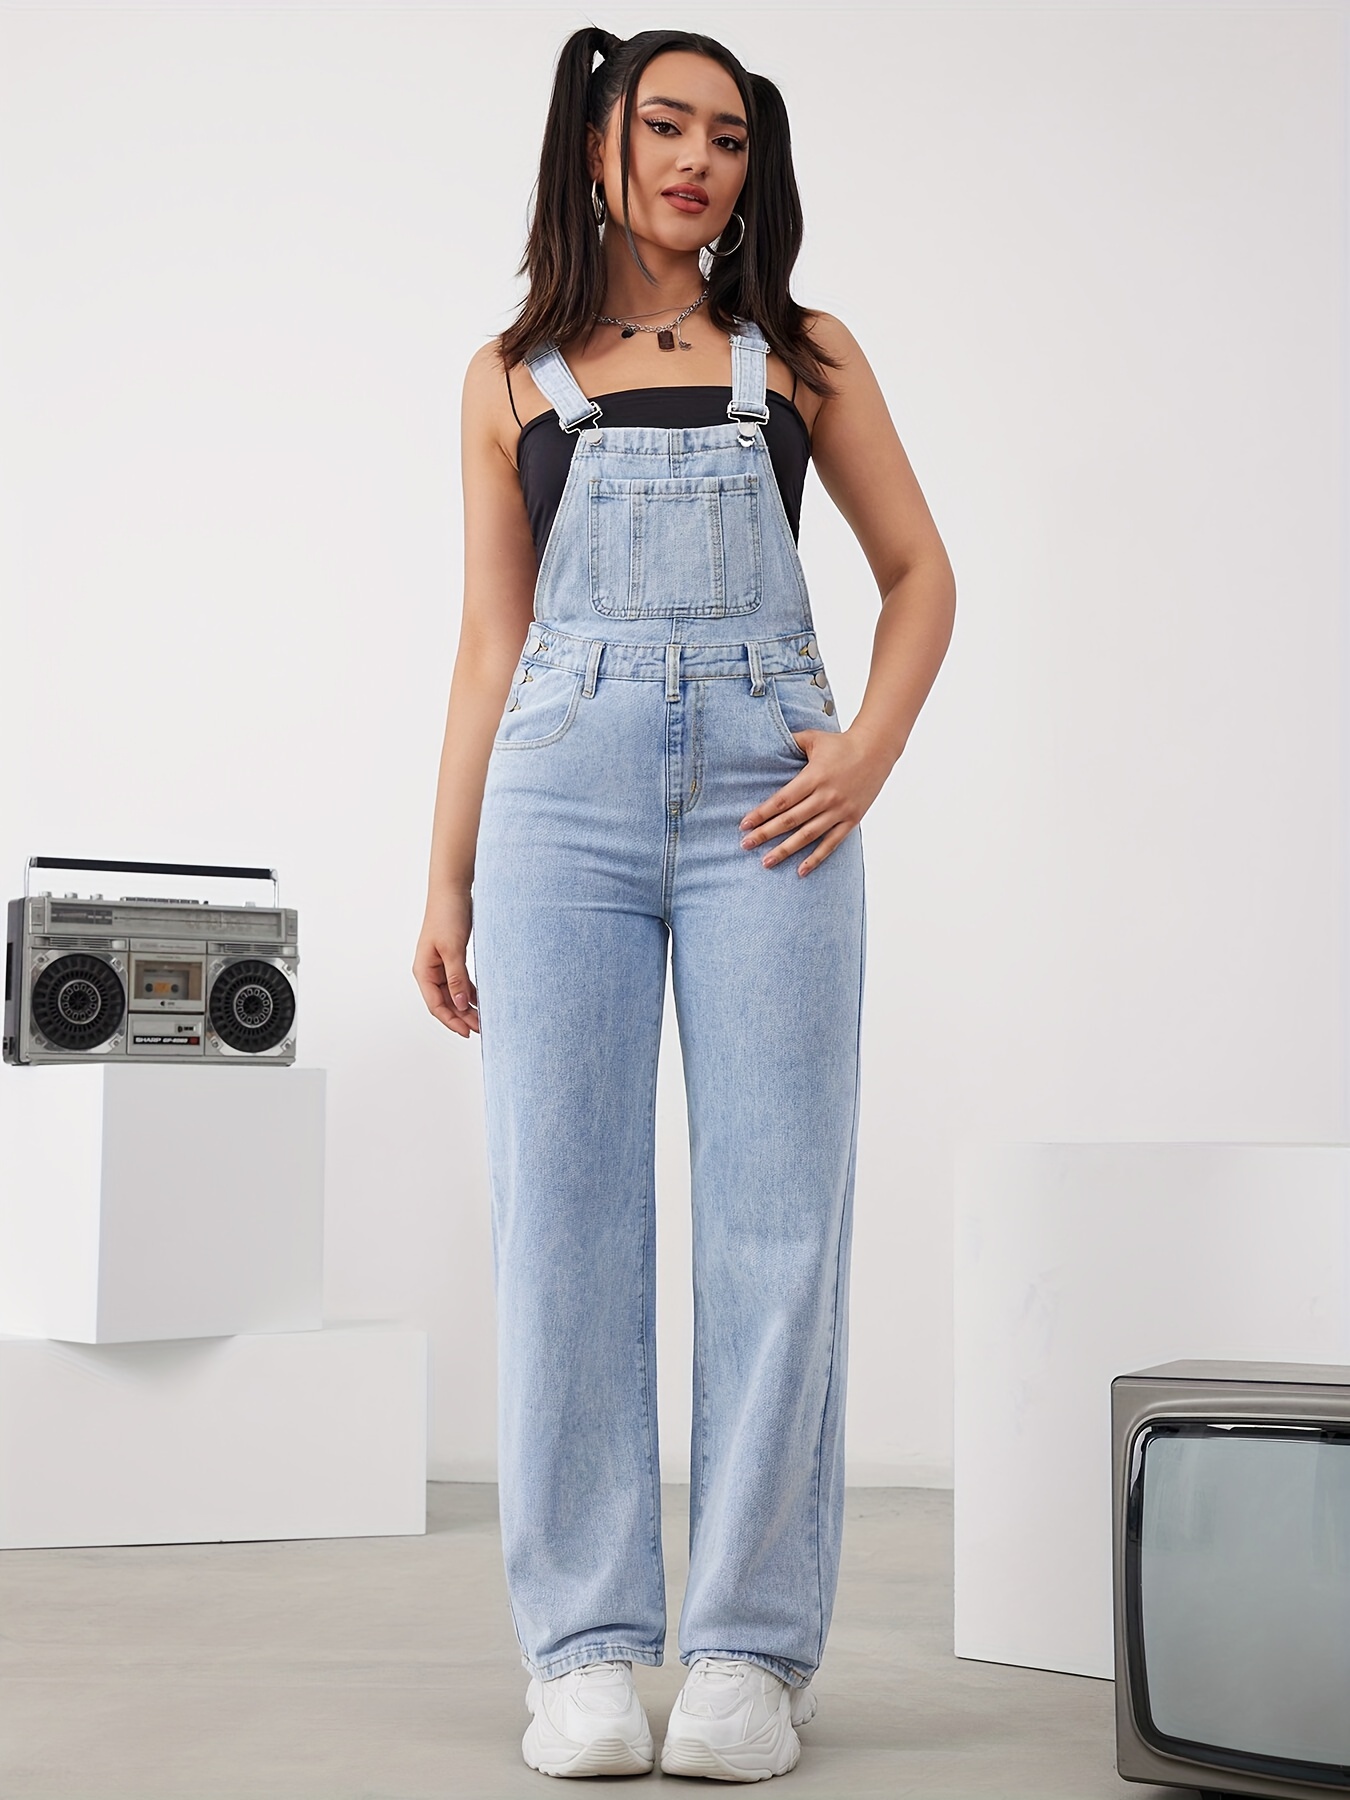 Casual Women Spaghetti Straps Denim Jumpsuit Wide Leg Jeans Sleeveless  Overalls Summer Outfit Oversize S-3XL